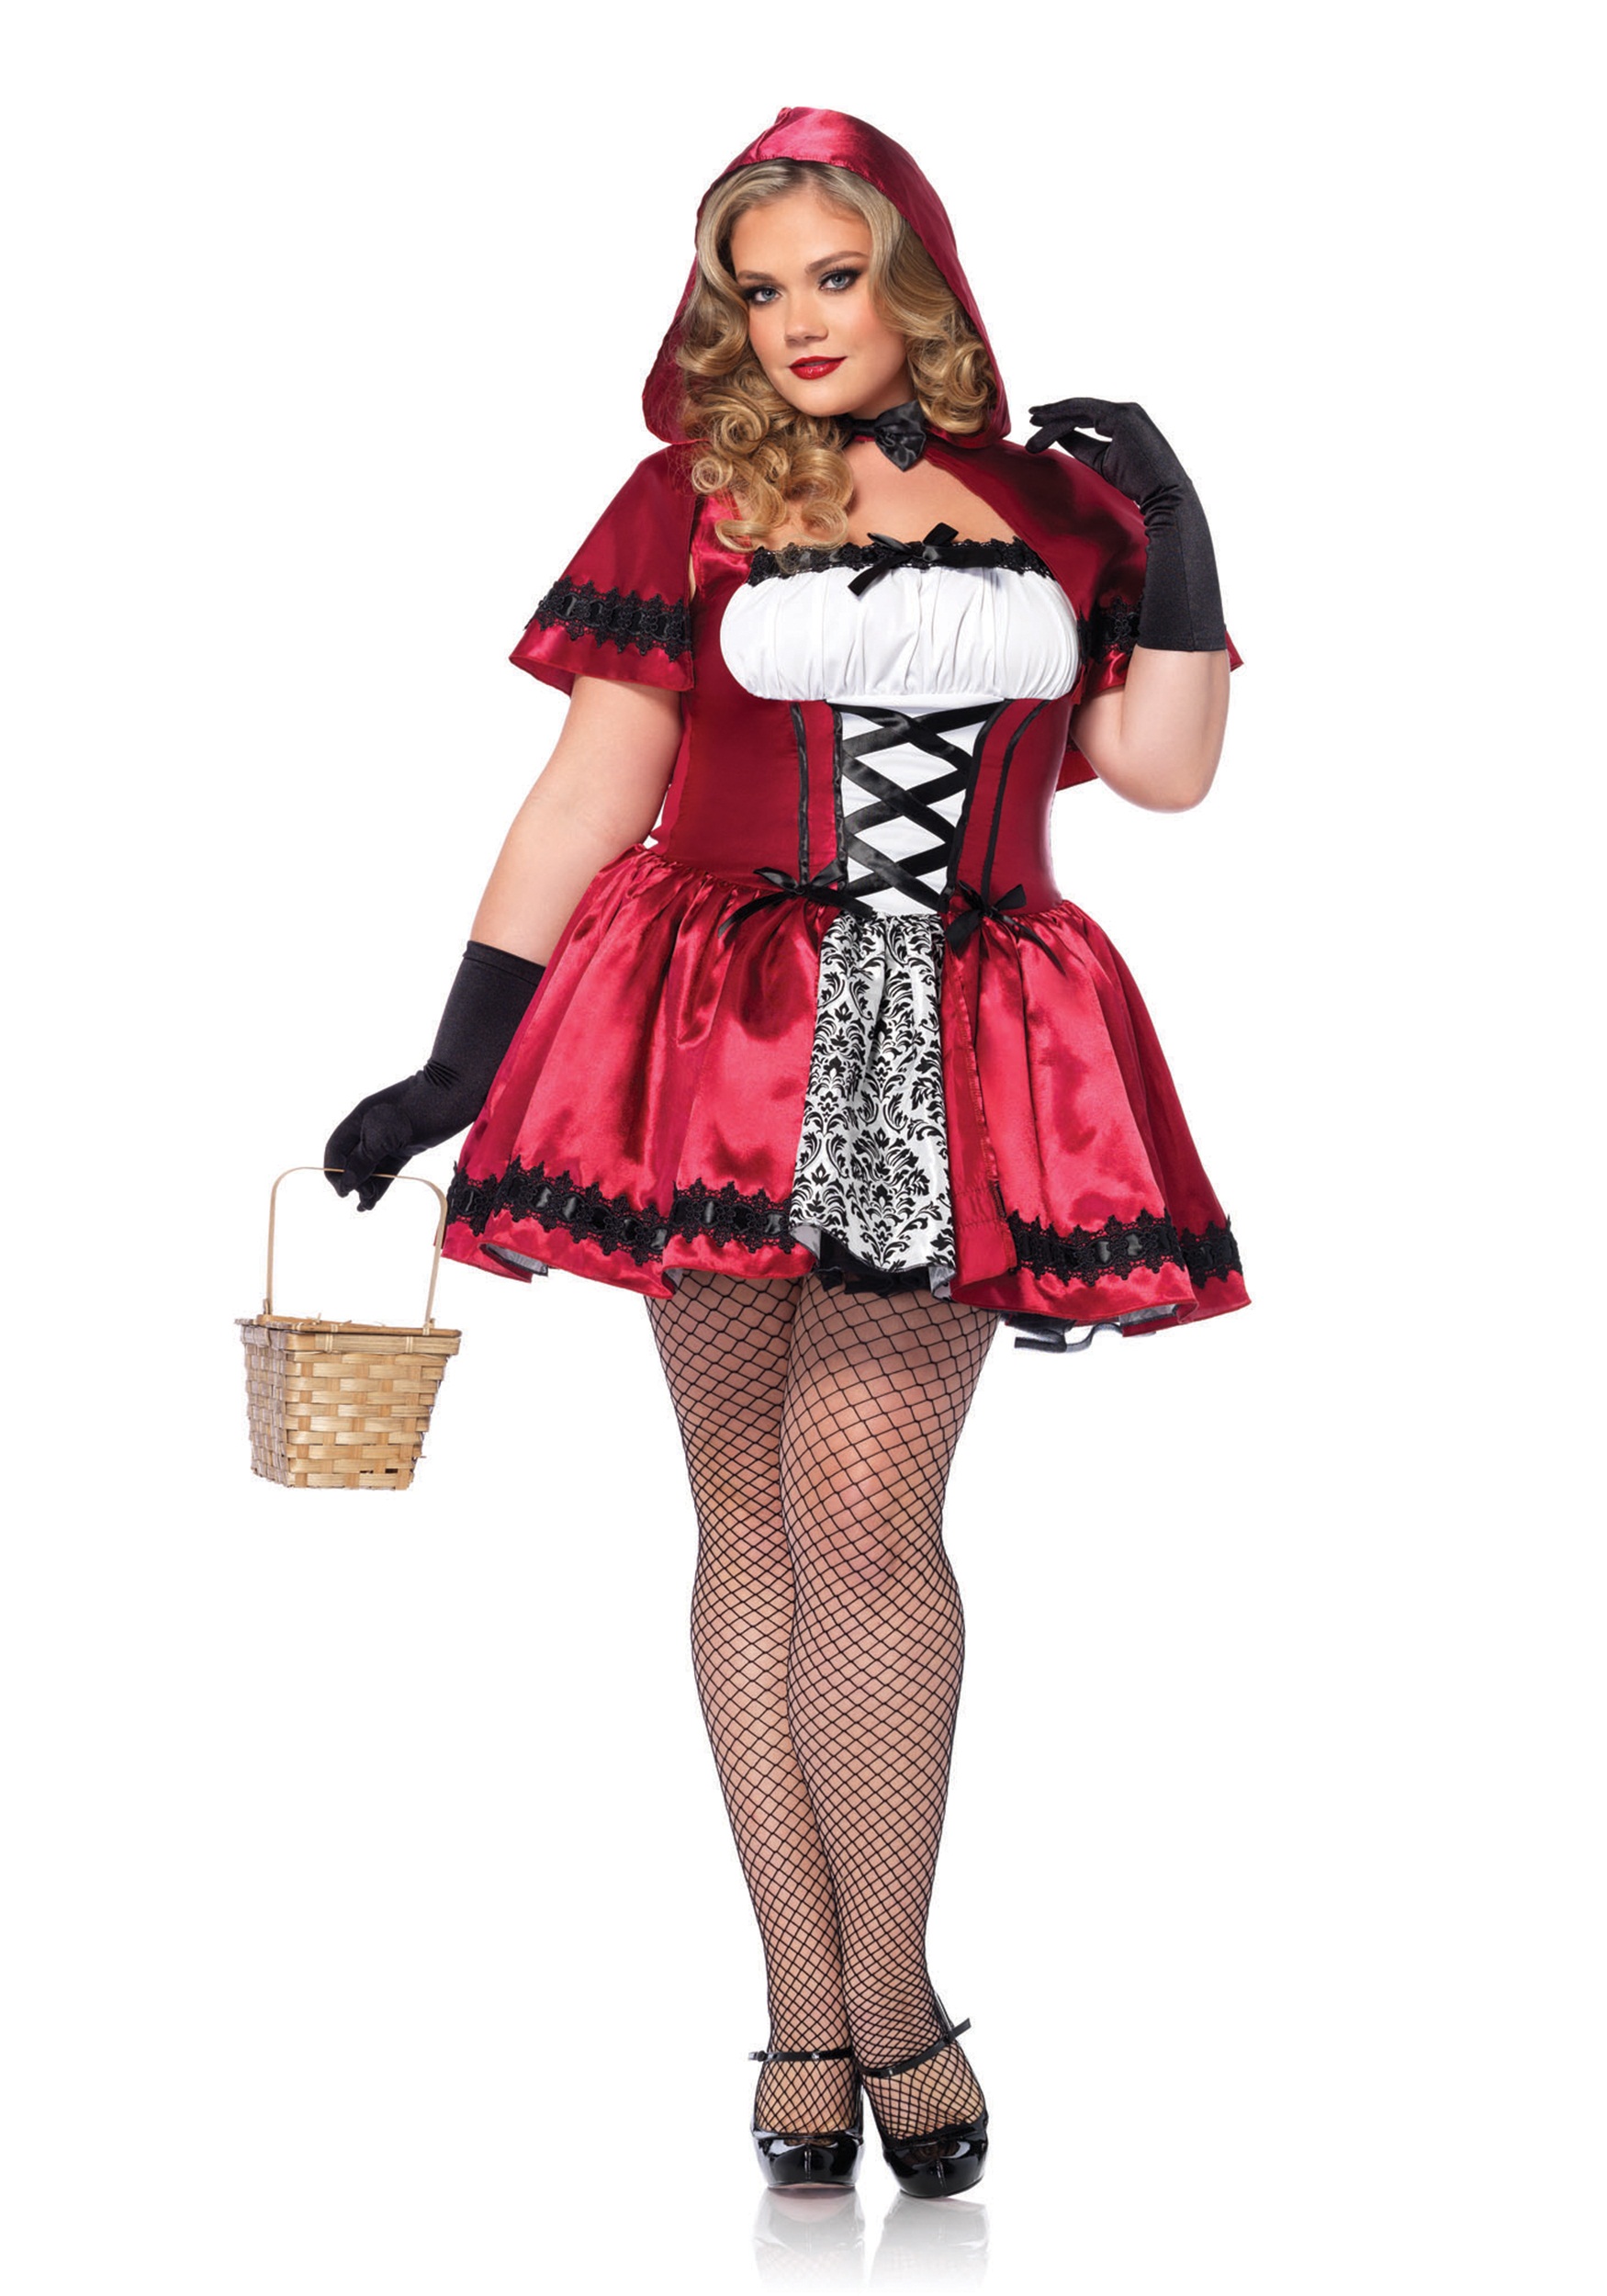 Photos - Fancy Dress MKW Leg Avenue Plus Size Gothic Red Riding Hood Womens Costume Black/Red L 